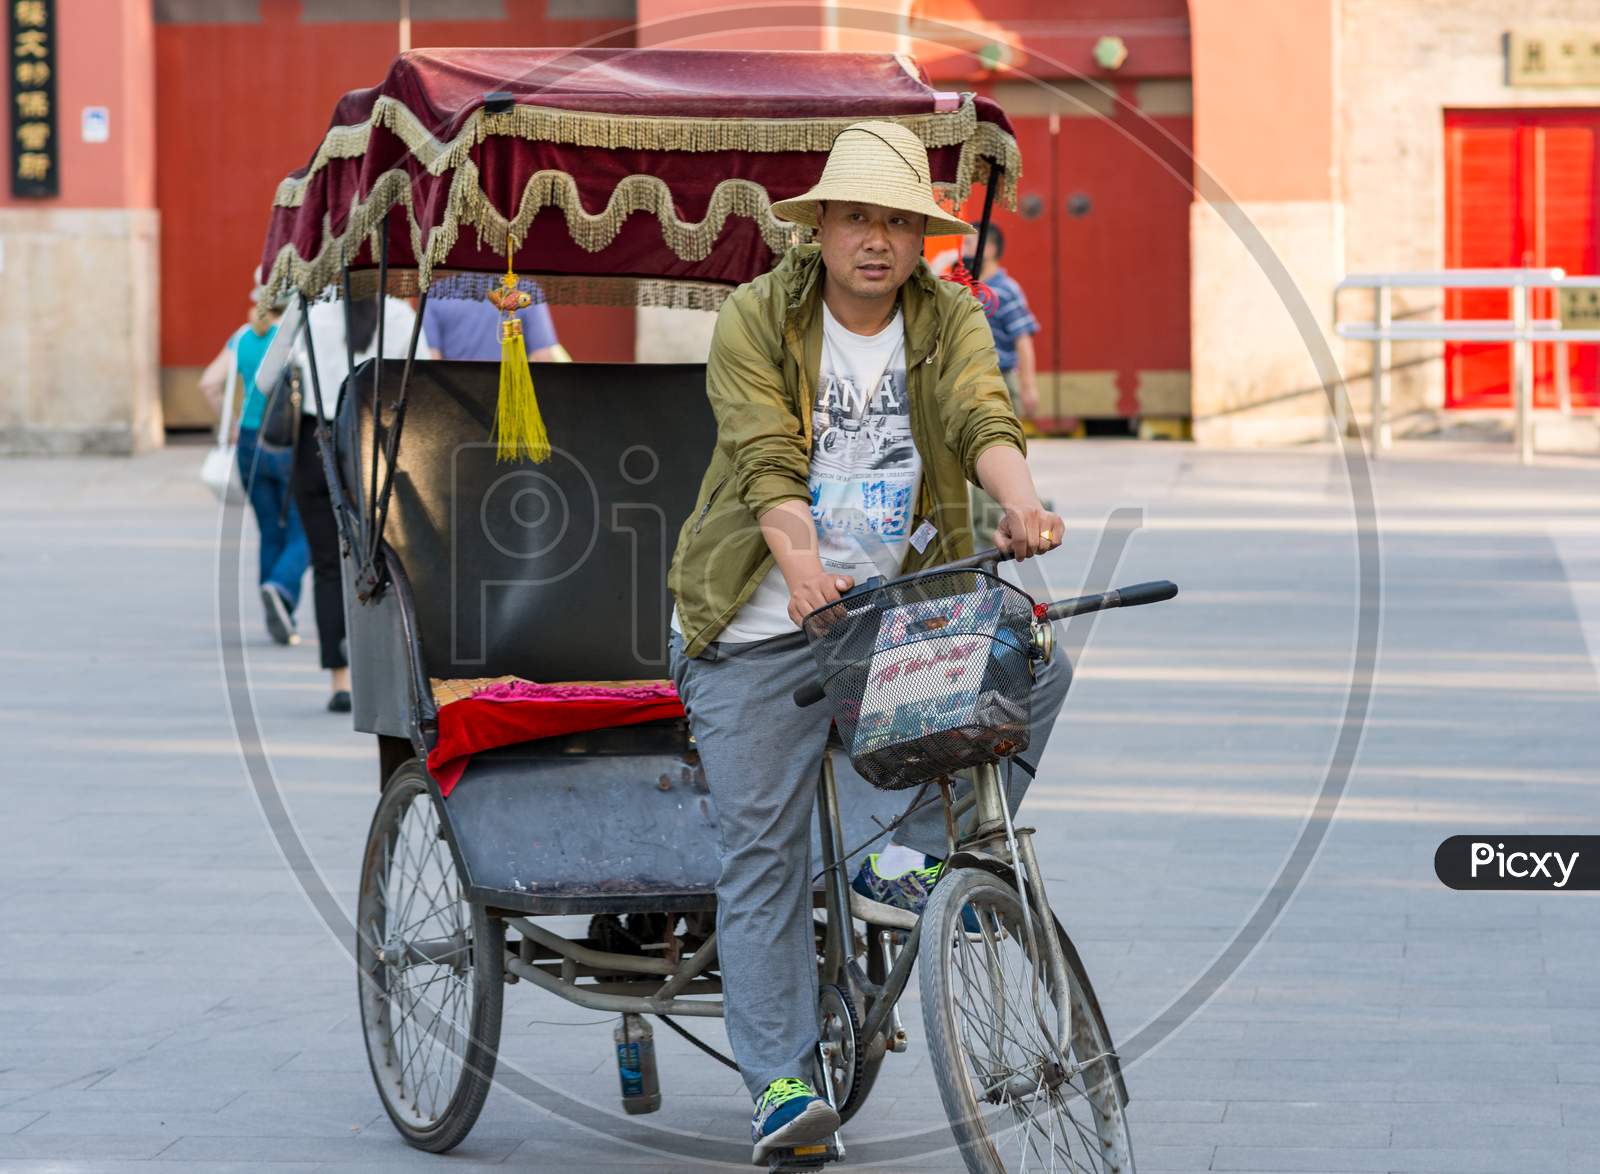 Bicycle Rickshaw Driver Waiting For Customers In Beijing, China